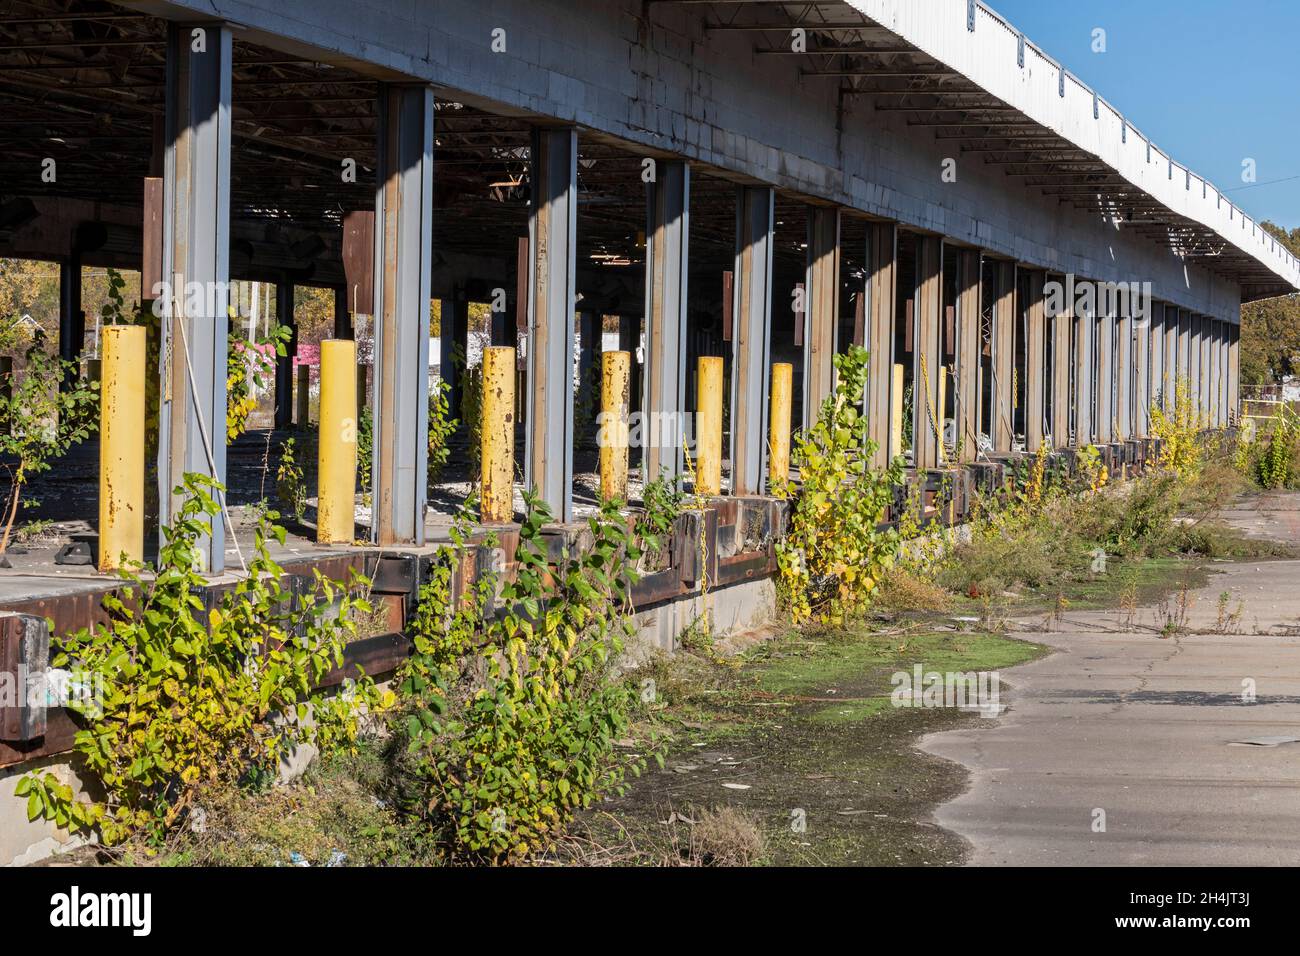 Detroit, Michigan - Loading docks at an abandoned trucking terminal, previously operated by Universal Truckload Services. Stock Photo